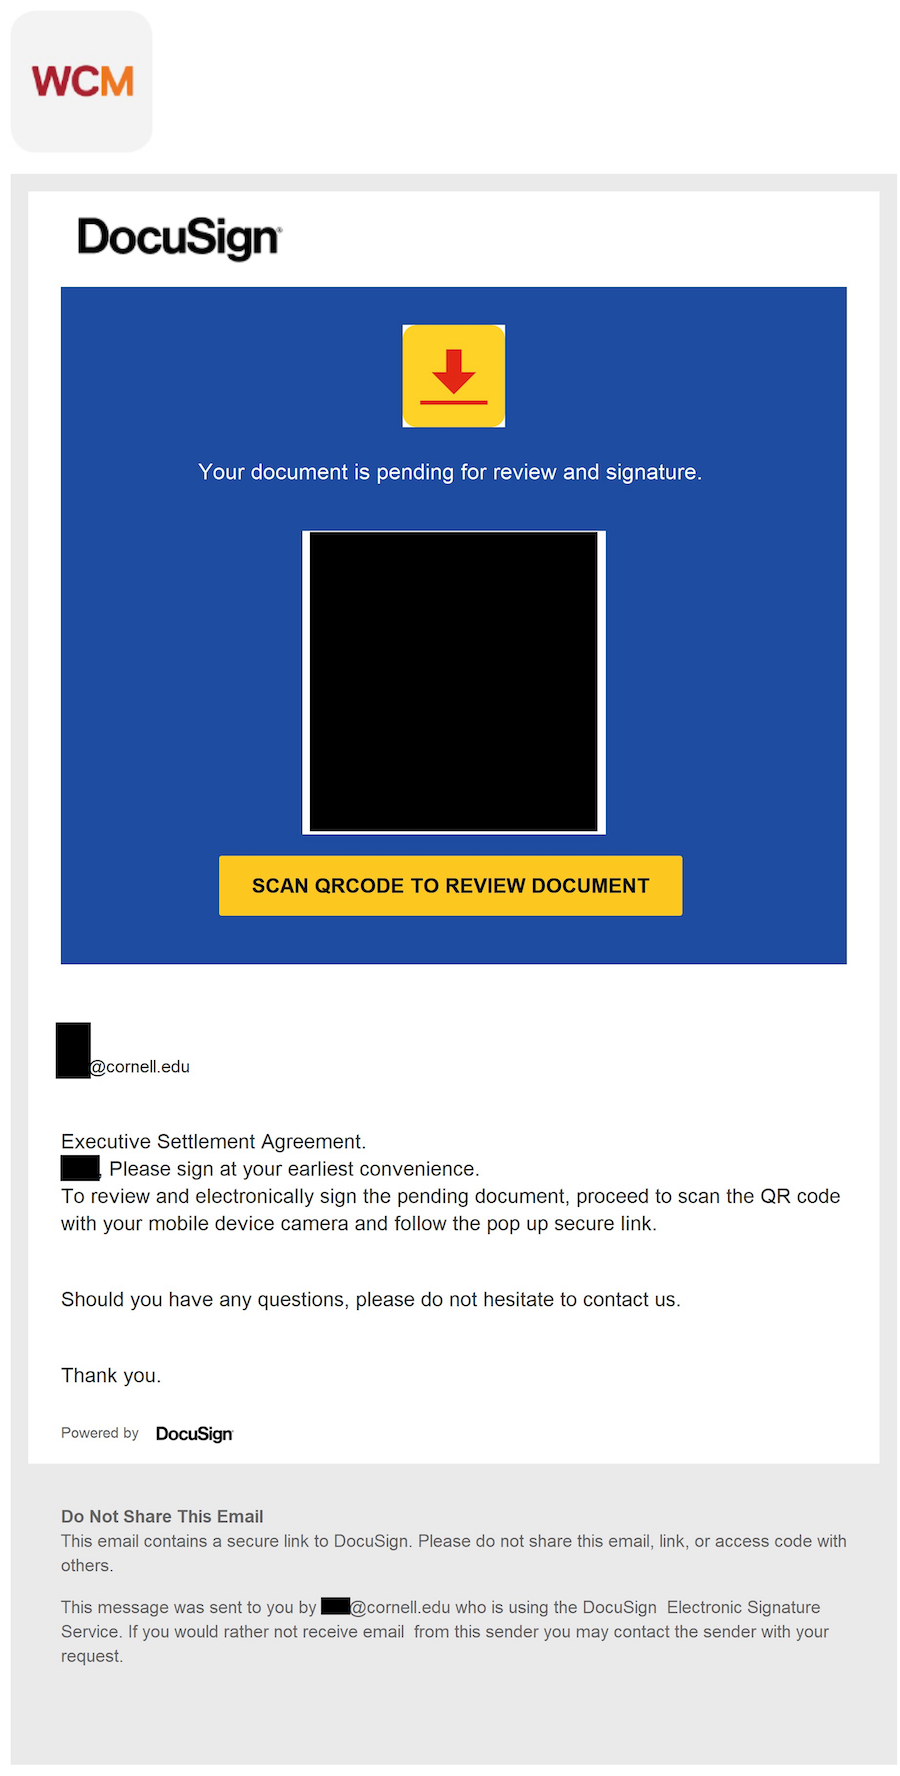 A DocuSign-branded notification with the heading "Your document is pending for review and signature."